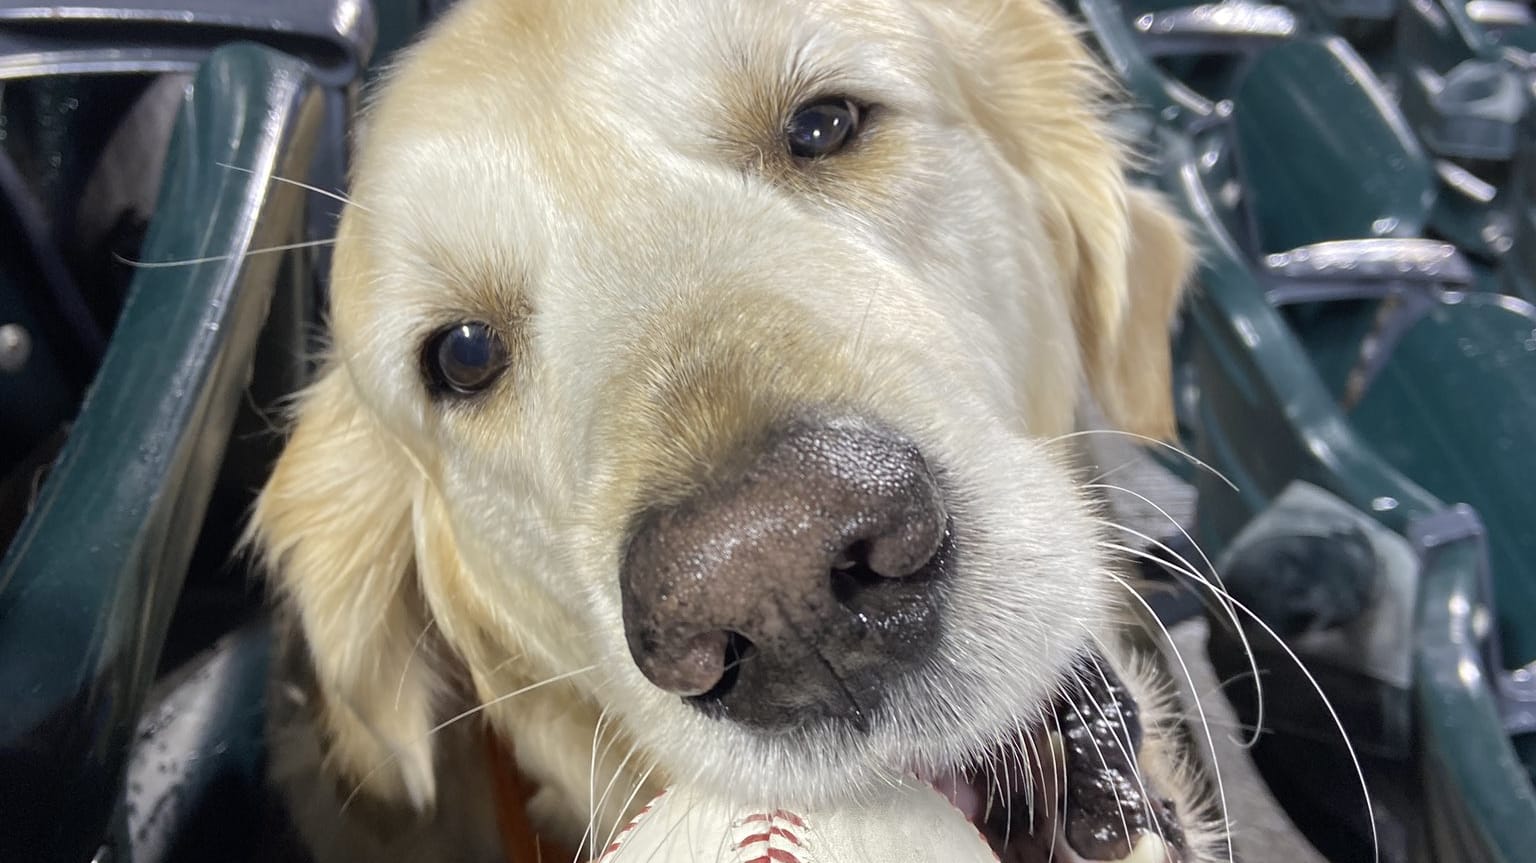 A close-up of a dog with a baseball in its mouth